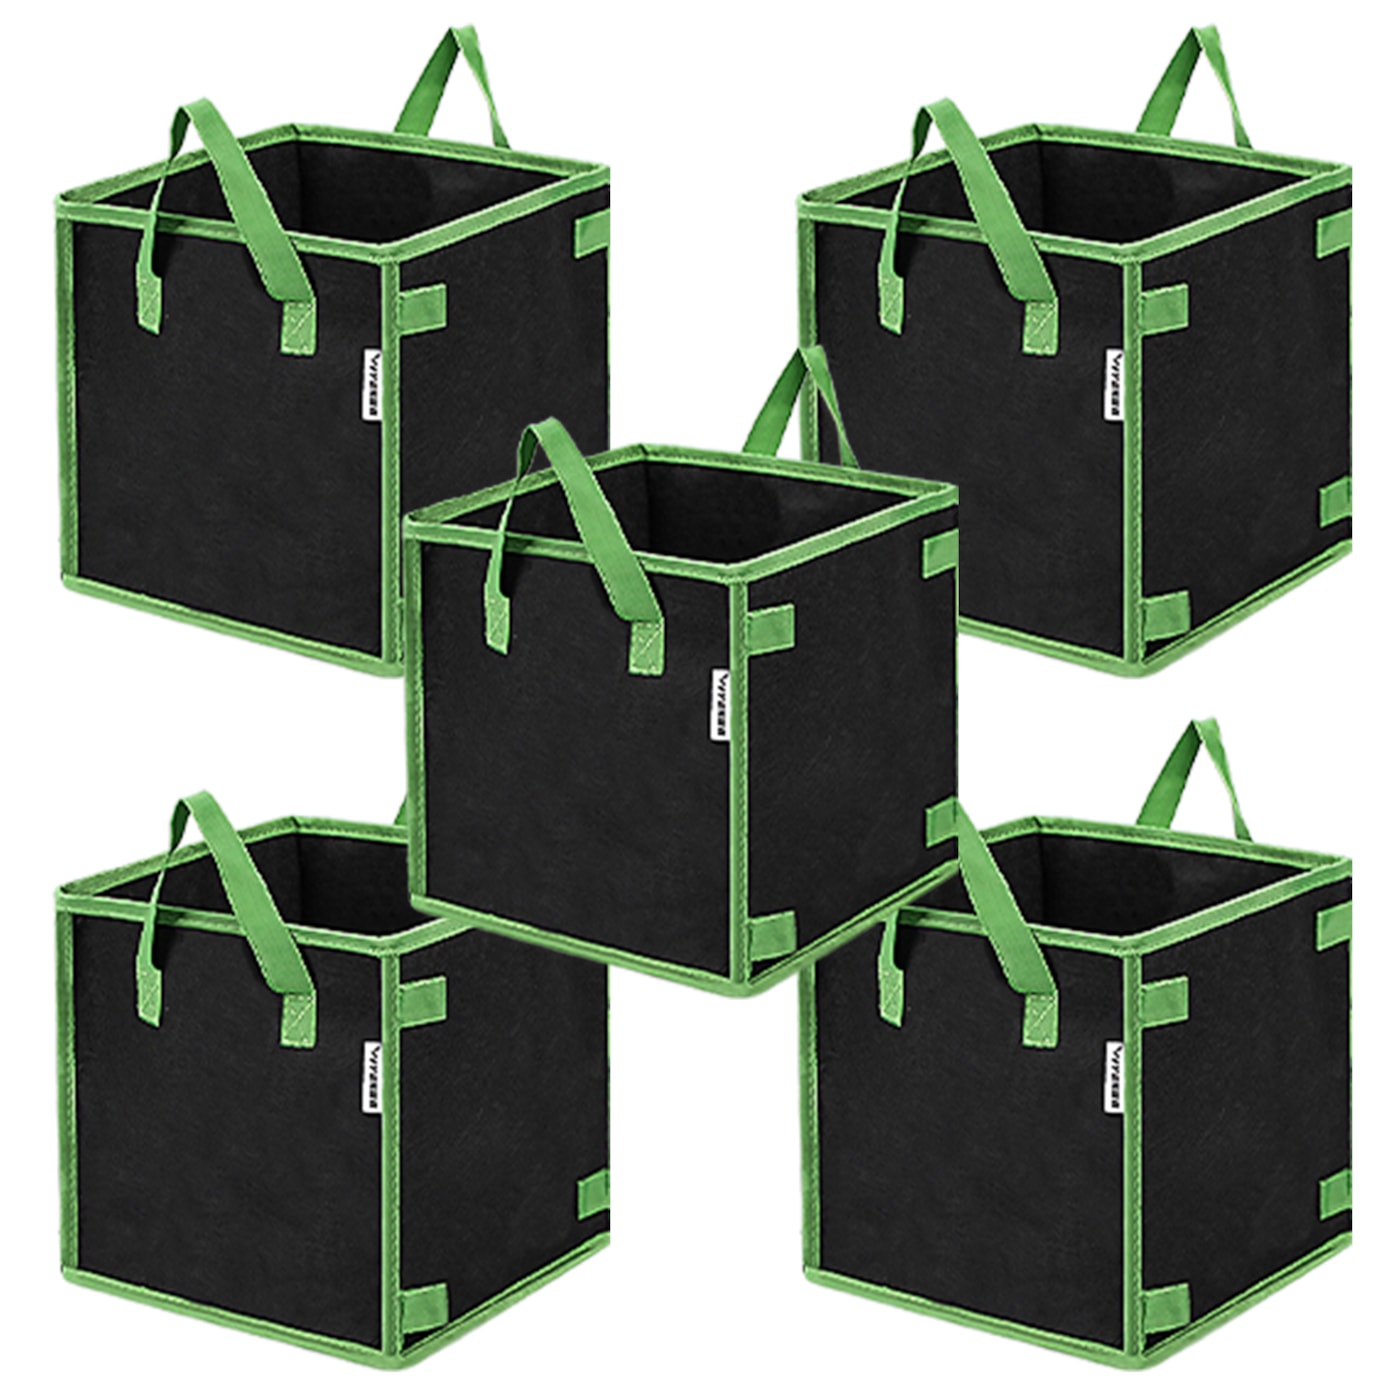 VIVOSUN 10 Gallon Square Grow Bags 5-Pack Black Thickened Nonwoven Fabric Pots with Handles